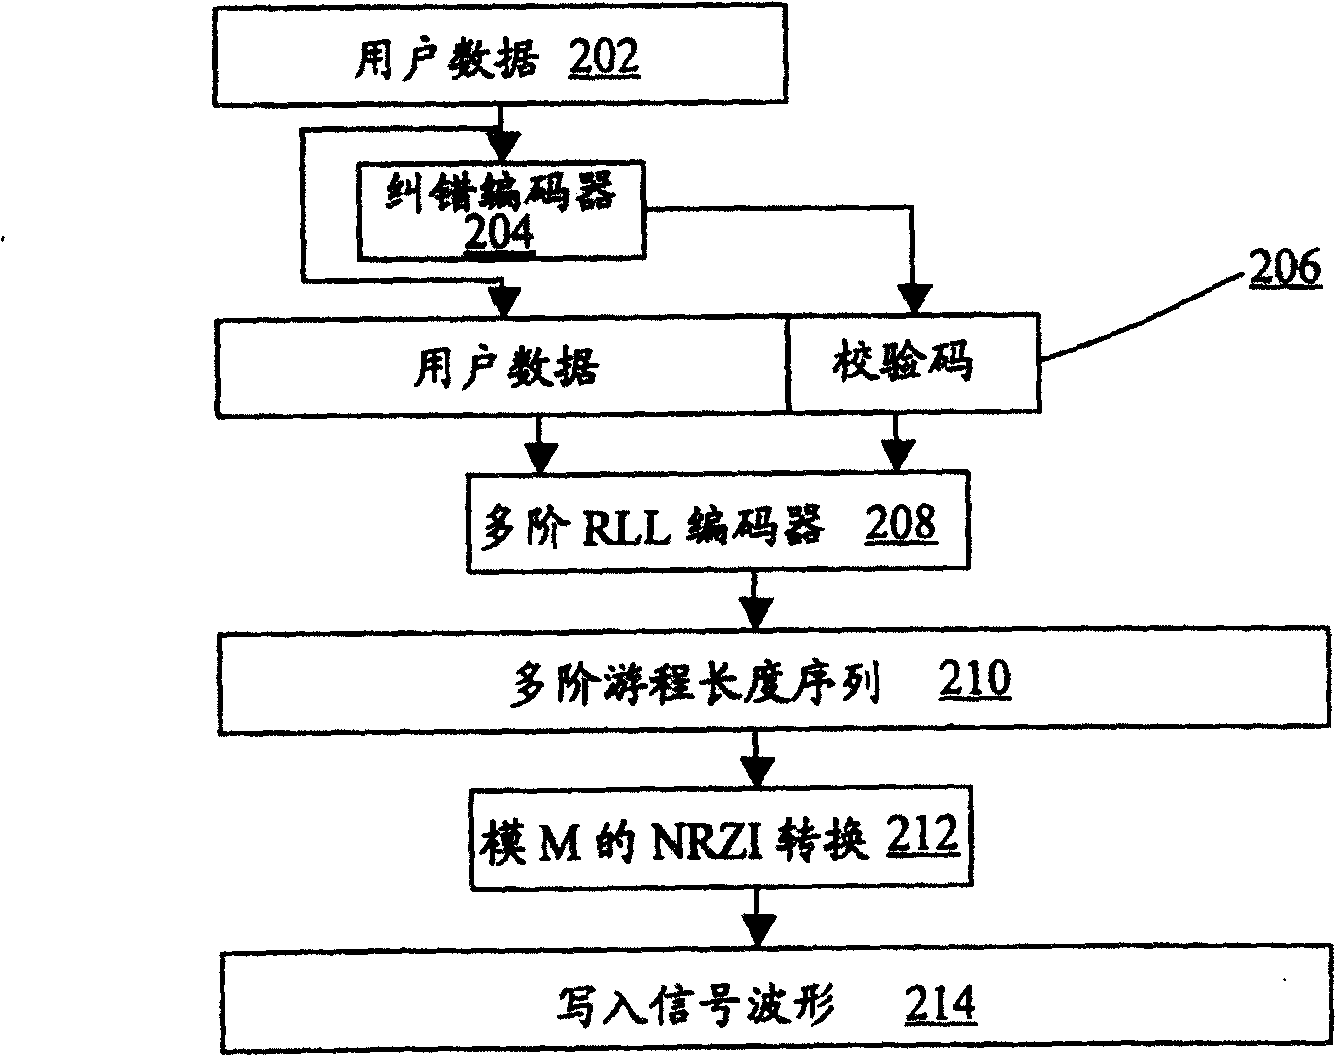 Method for producing multi-level read-only optical disc